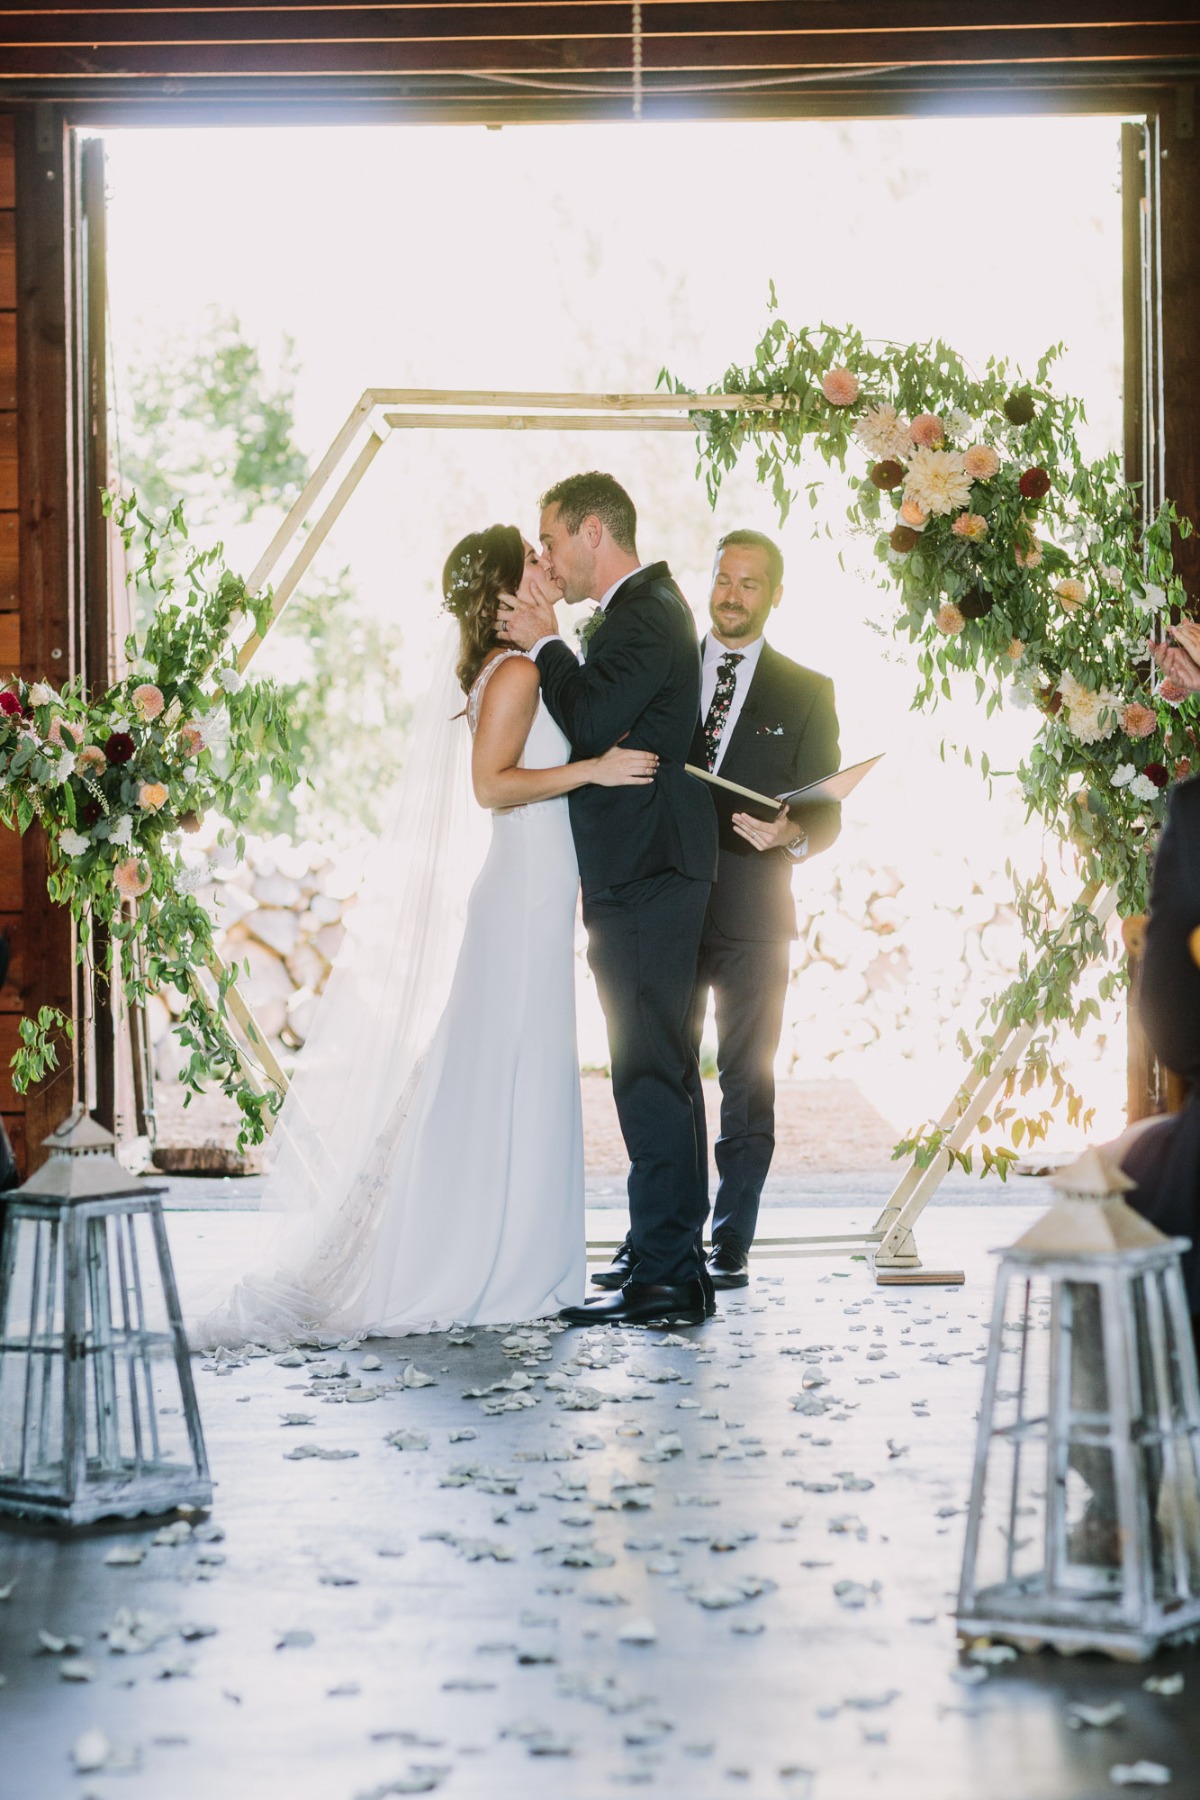 Laura & Gaetano: Rustic Highlights from a Charming, Darling Day